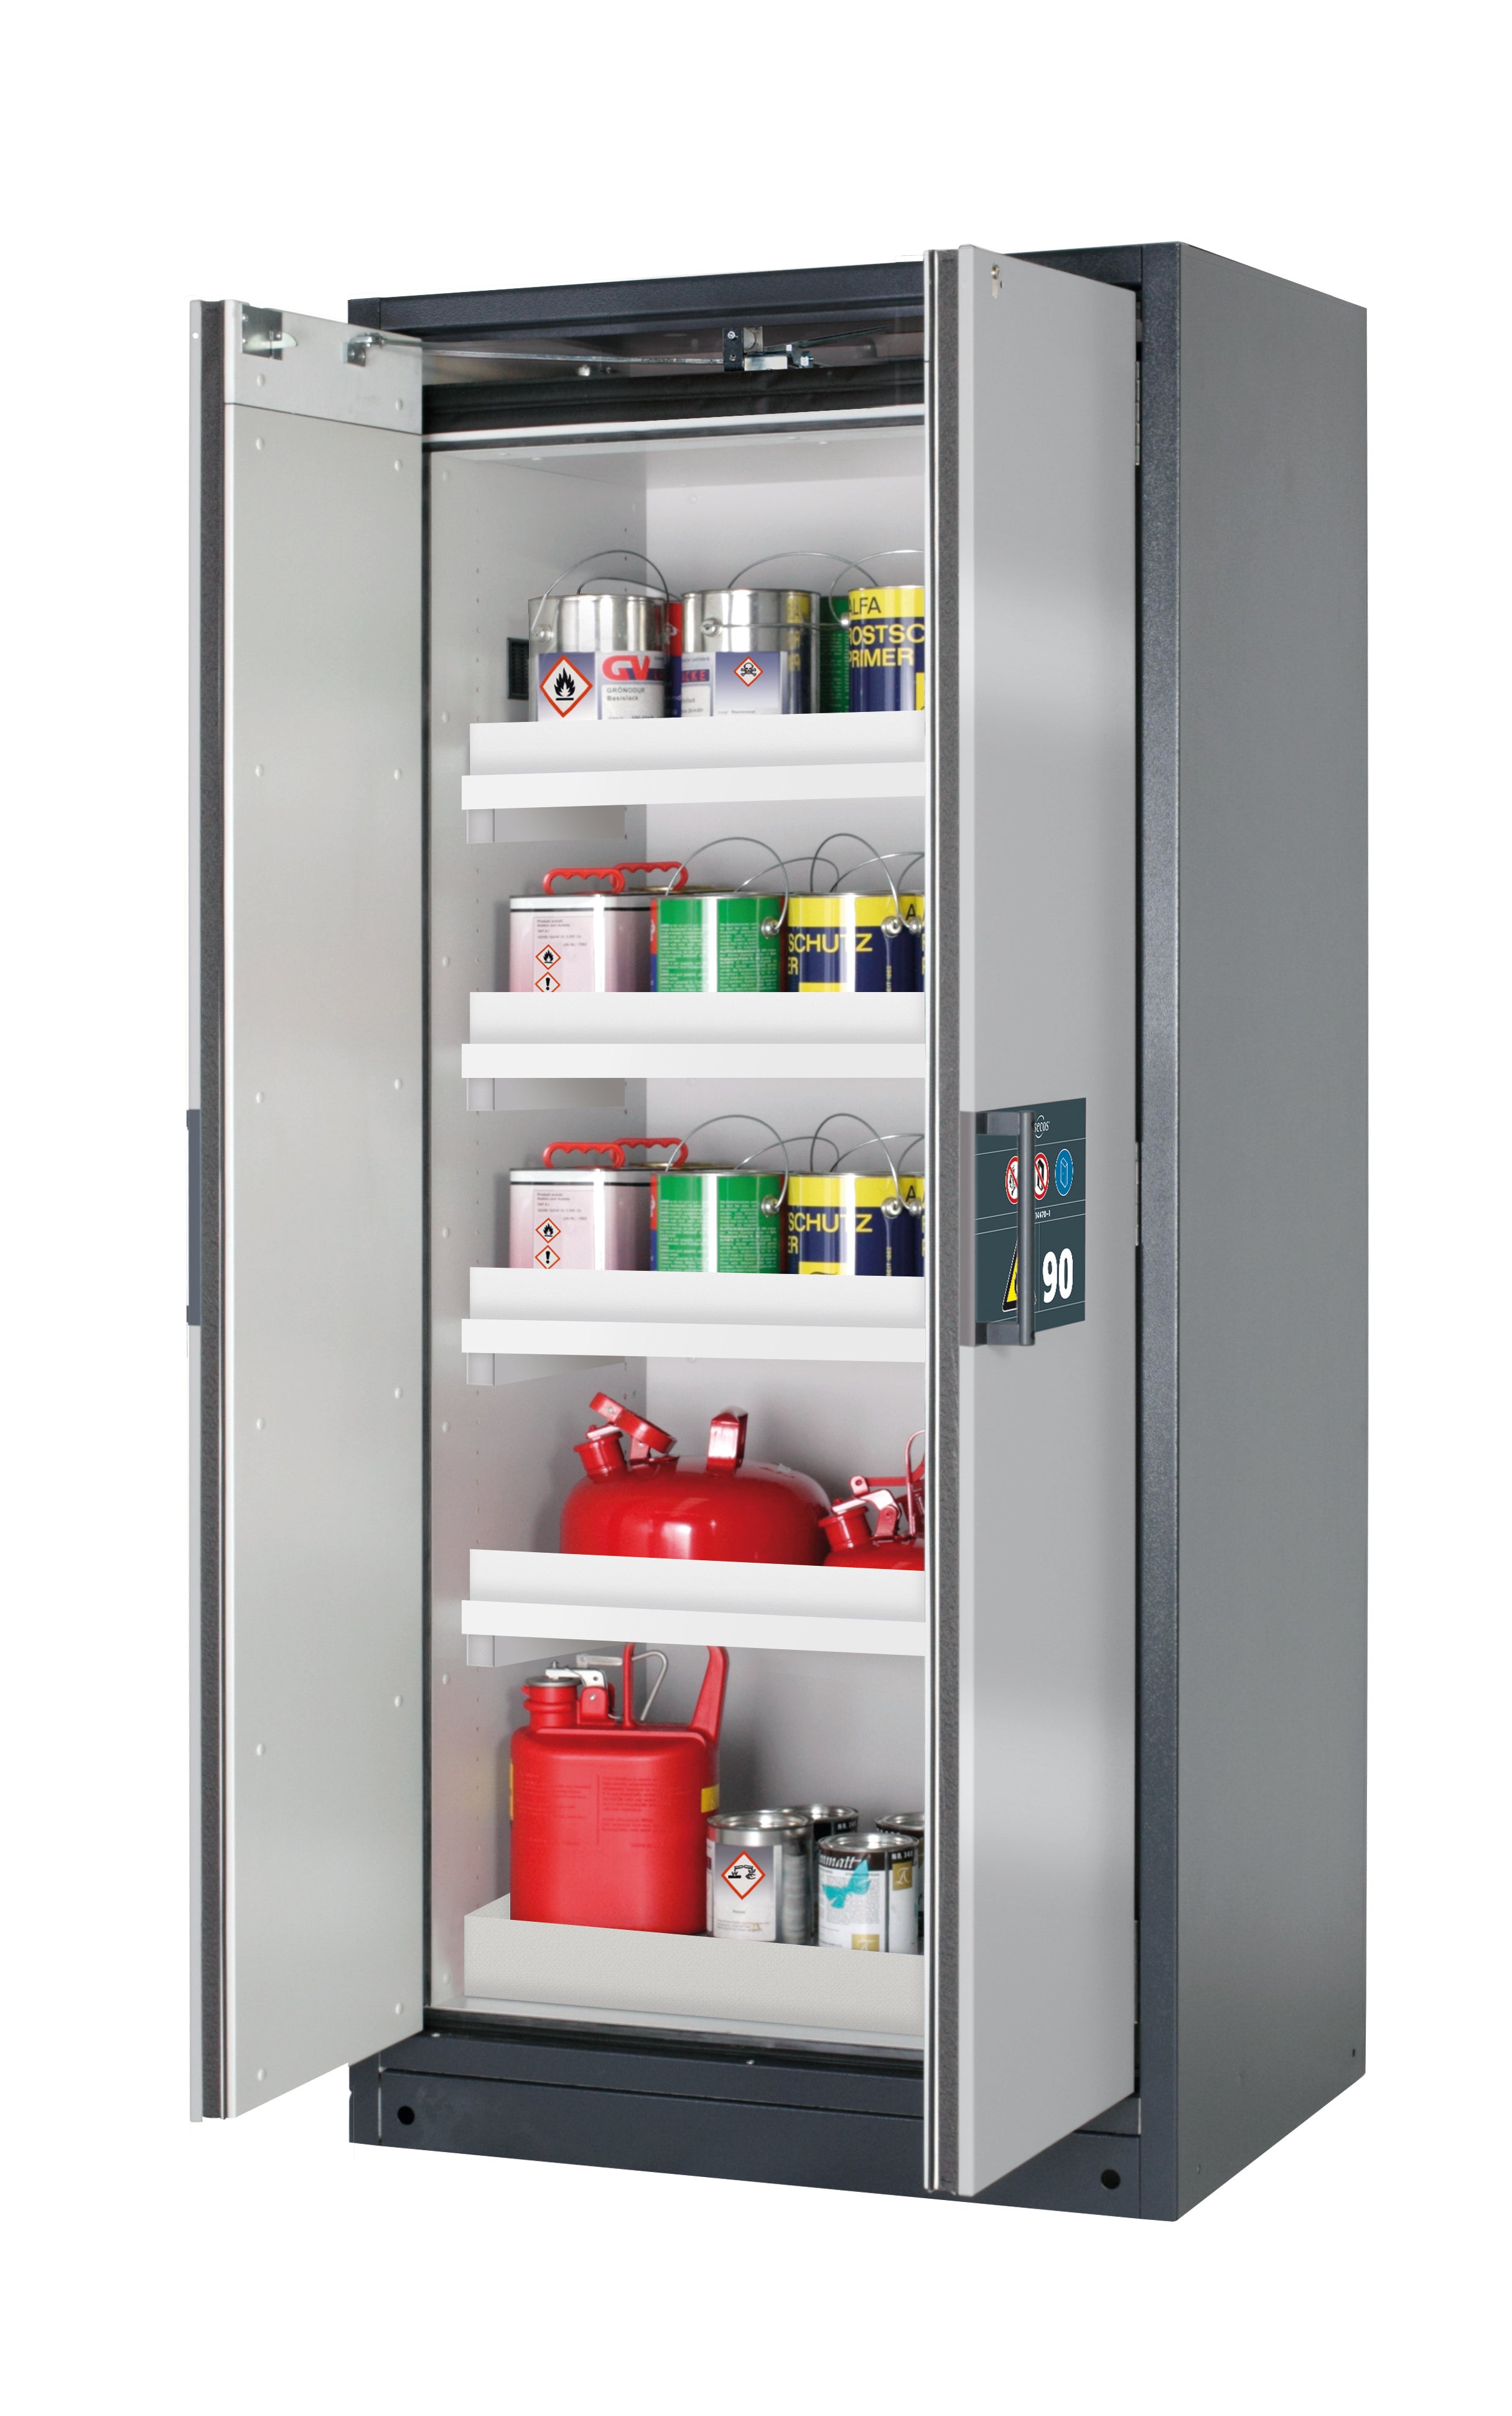 Type 90 safety storage cabinet Q-PEGASUS-90 model Q90.195.090.WDAC in asecos silver with 4x tray shelf (standard) (polypropylene),